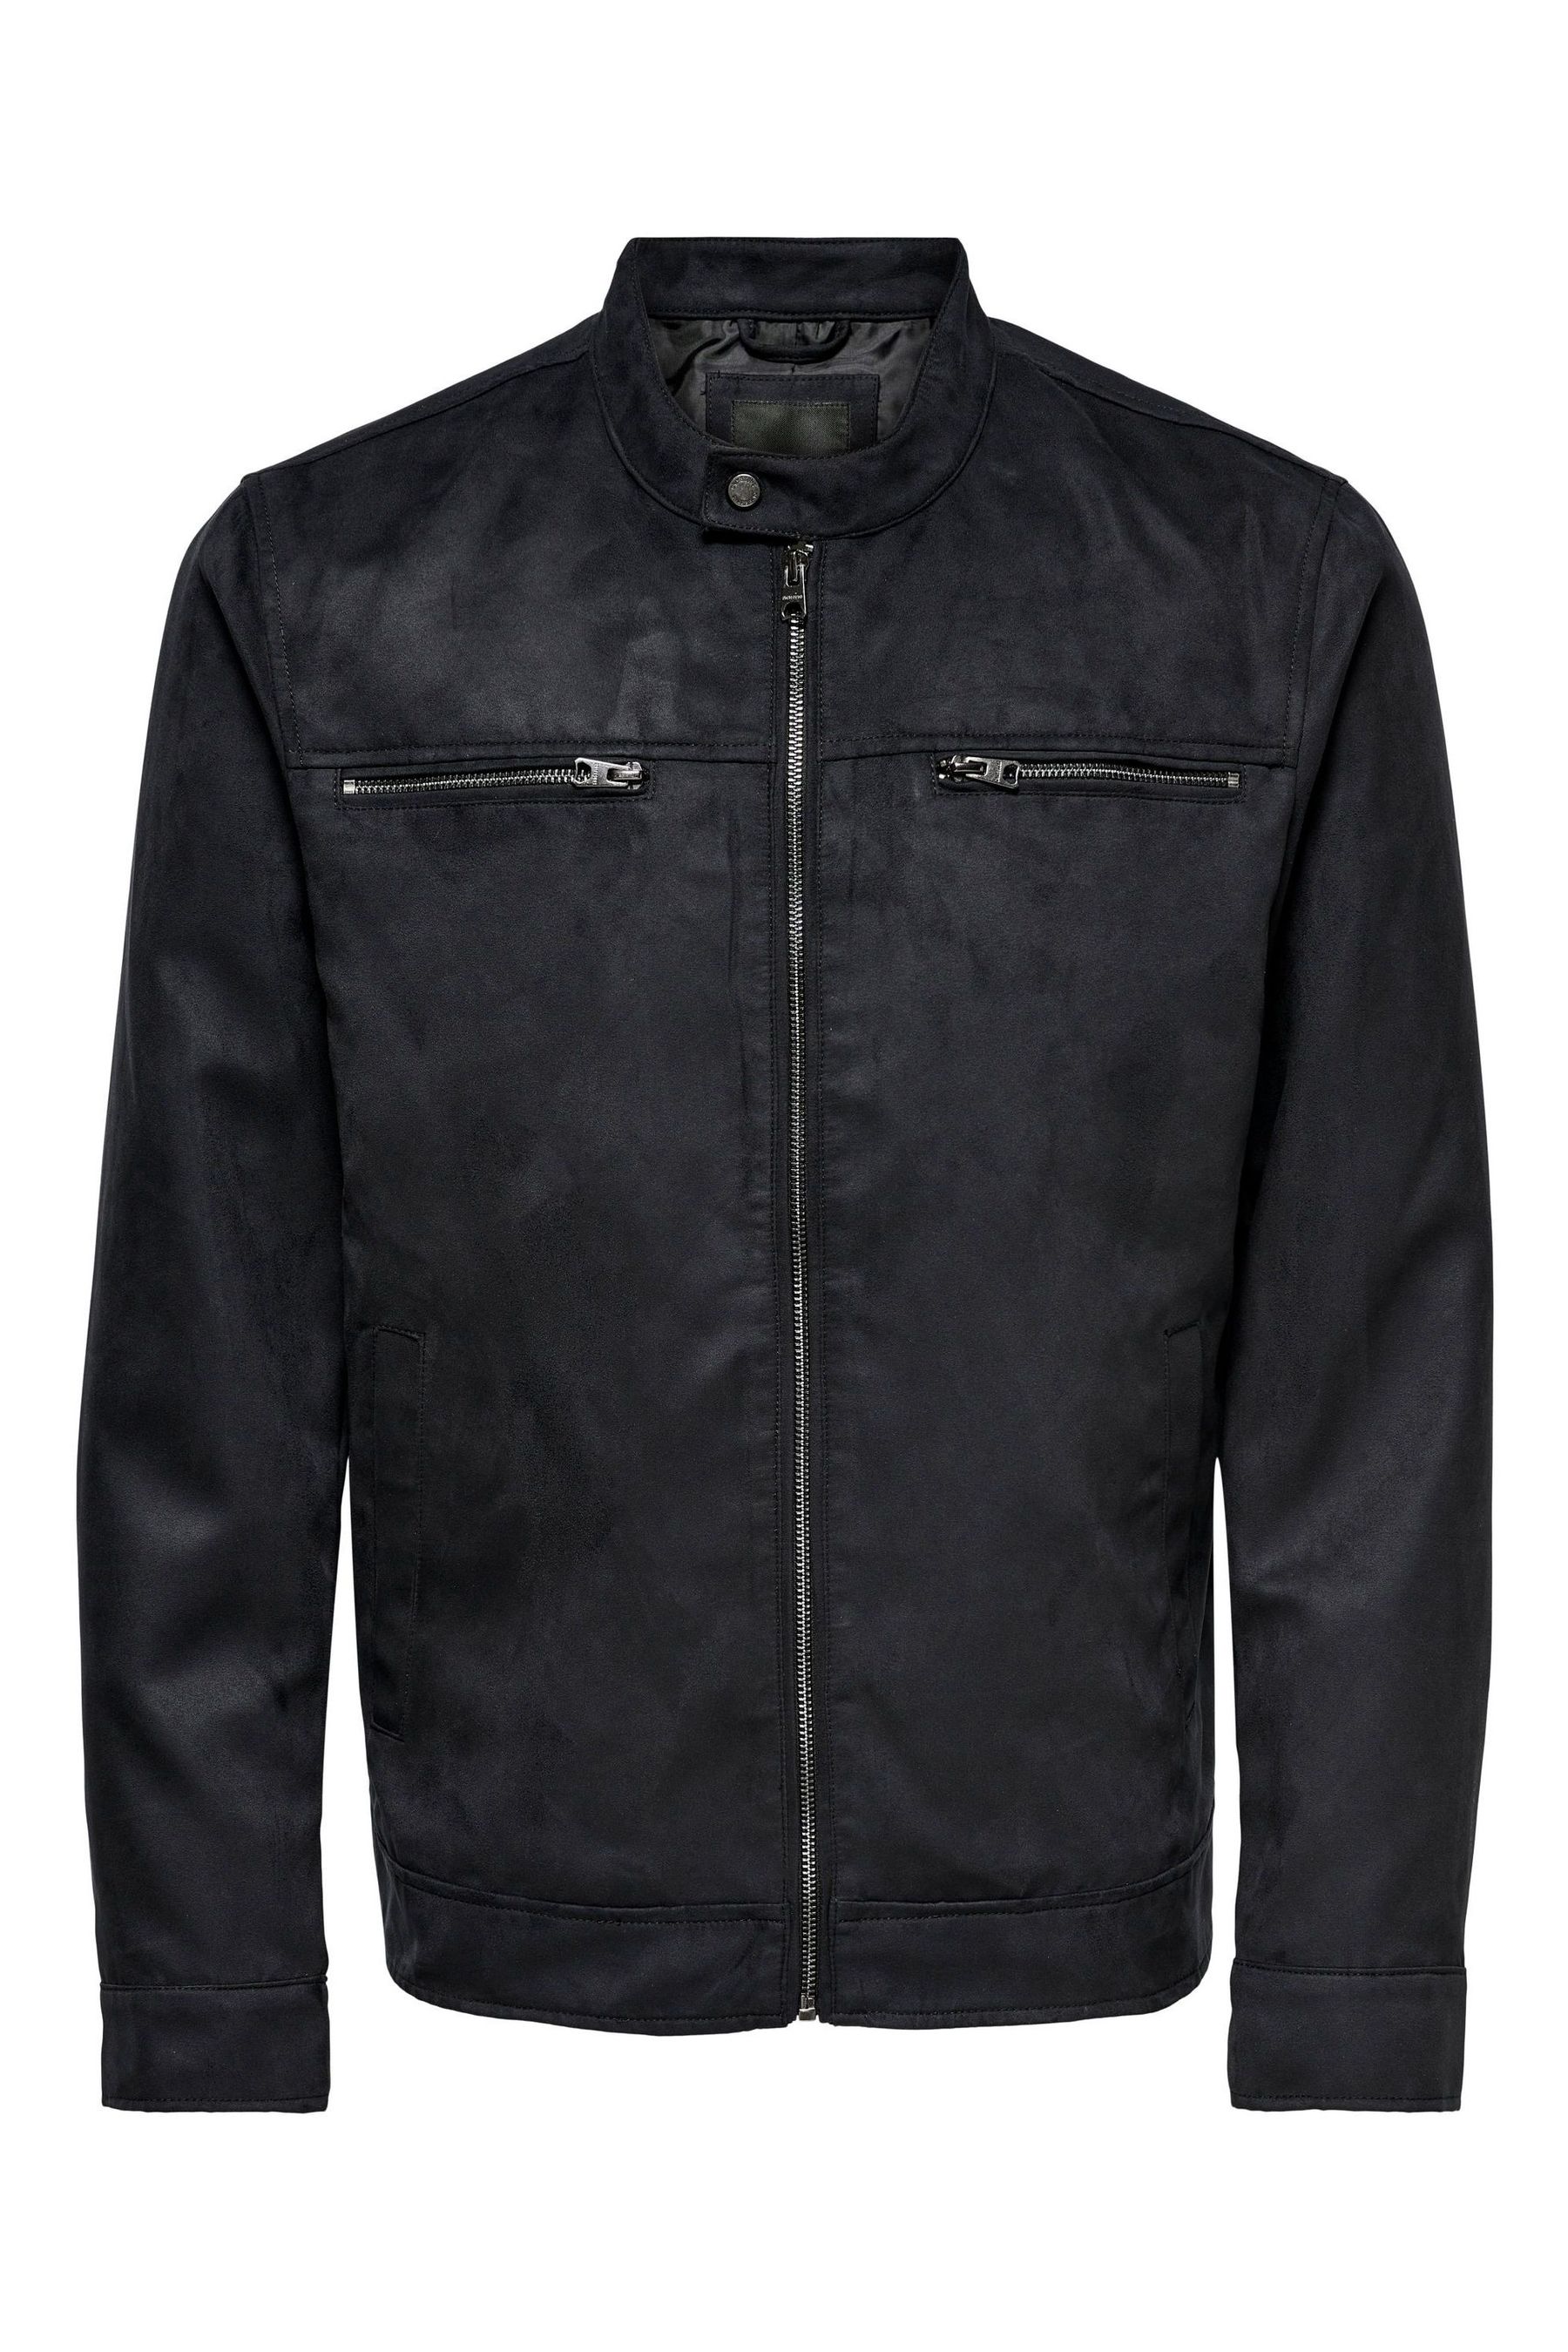 Buy Only & Sons Black Collarless Faux Suede Biker Jacket from the Next ...